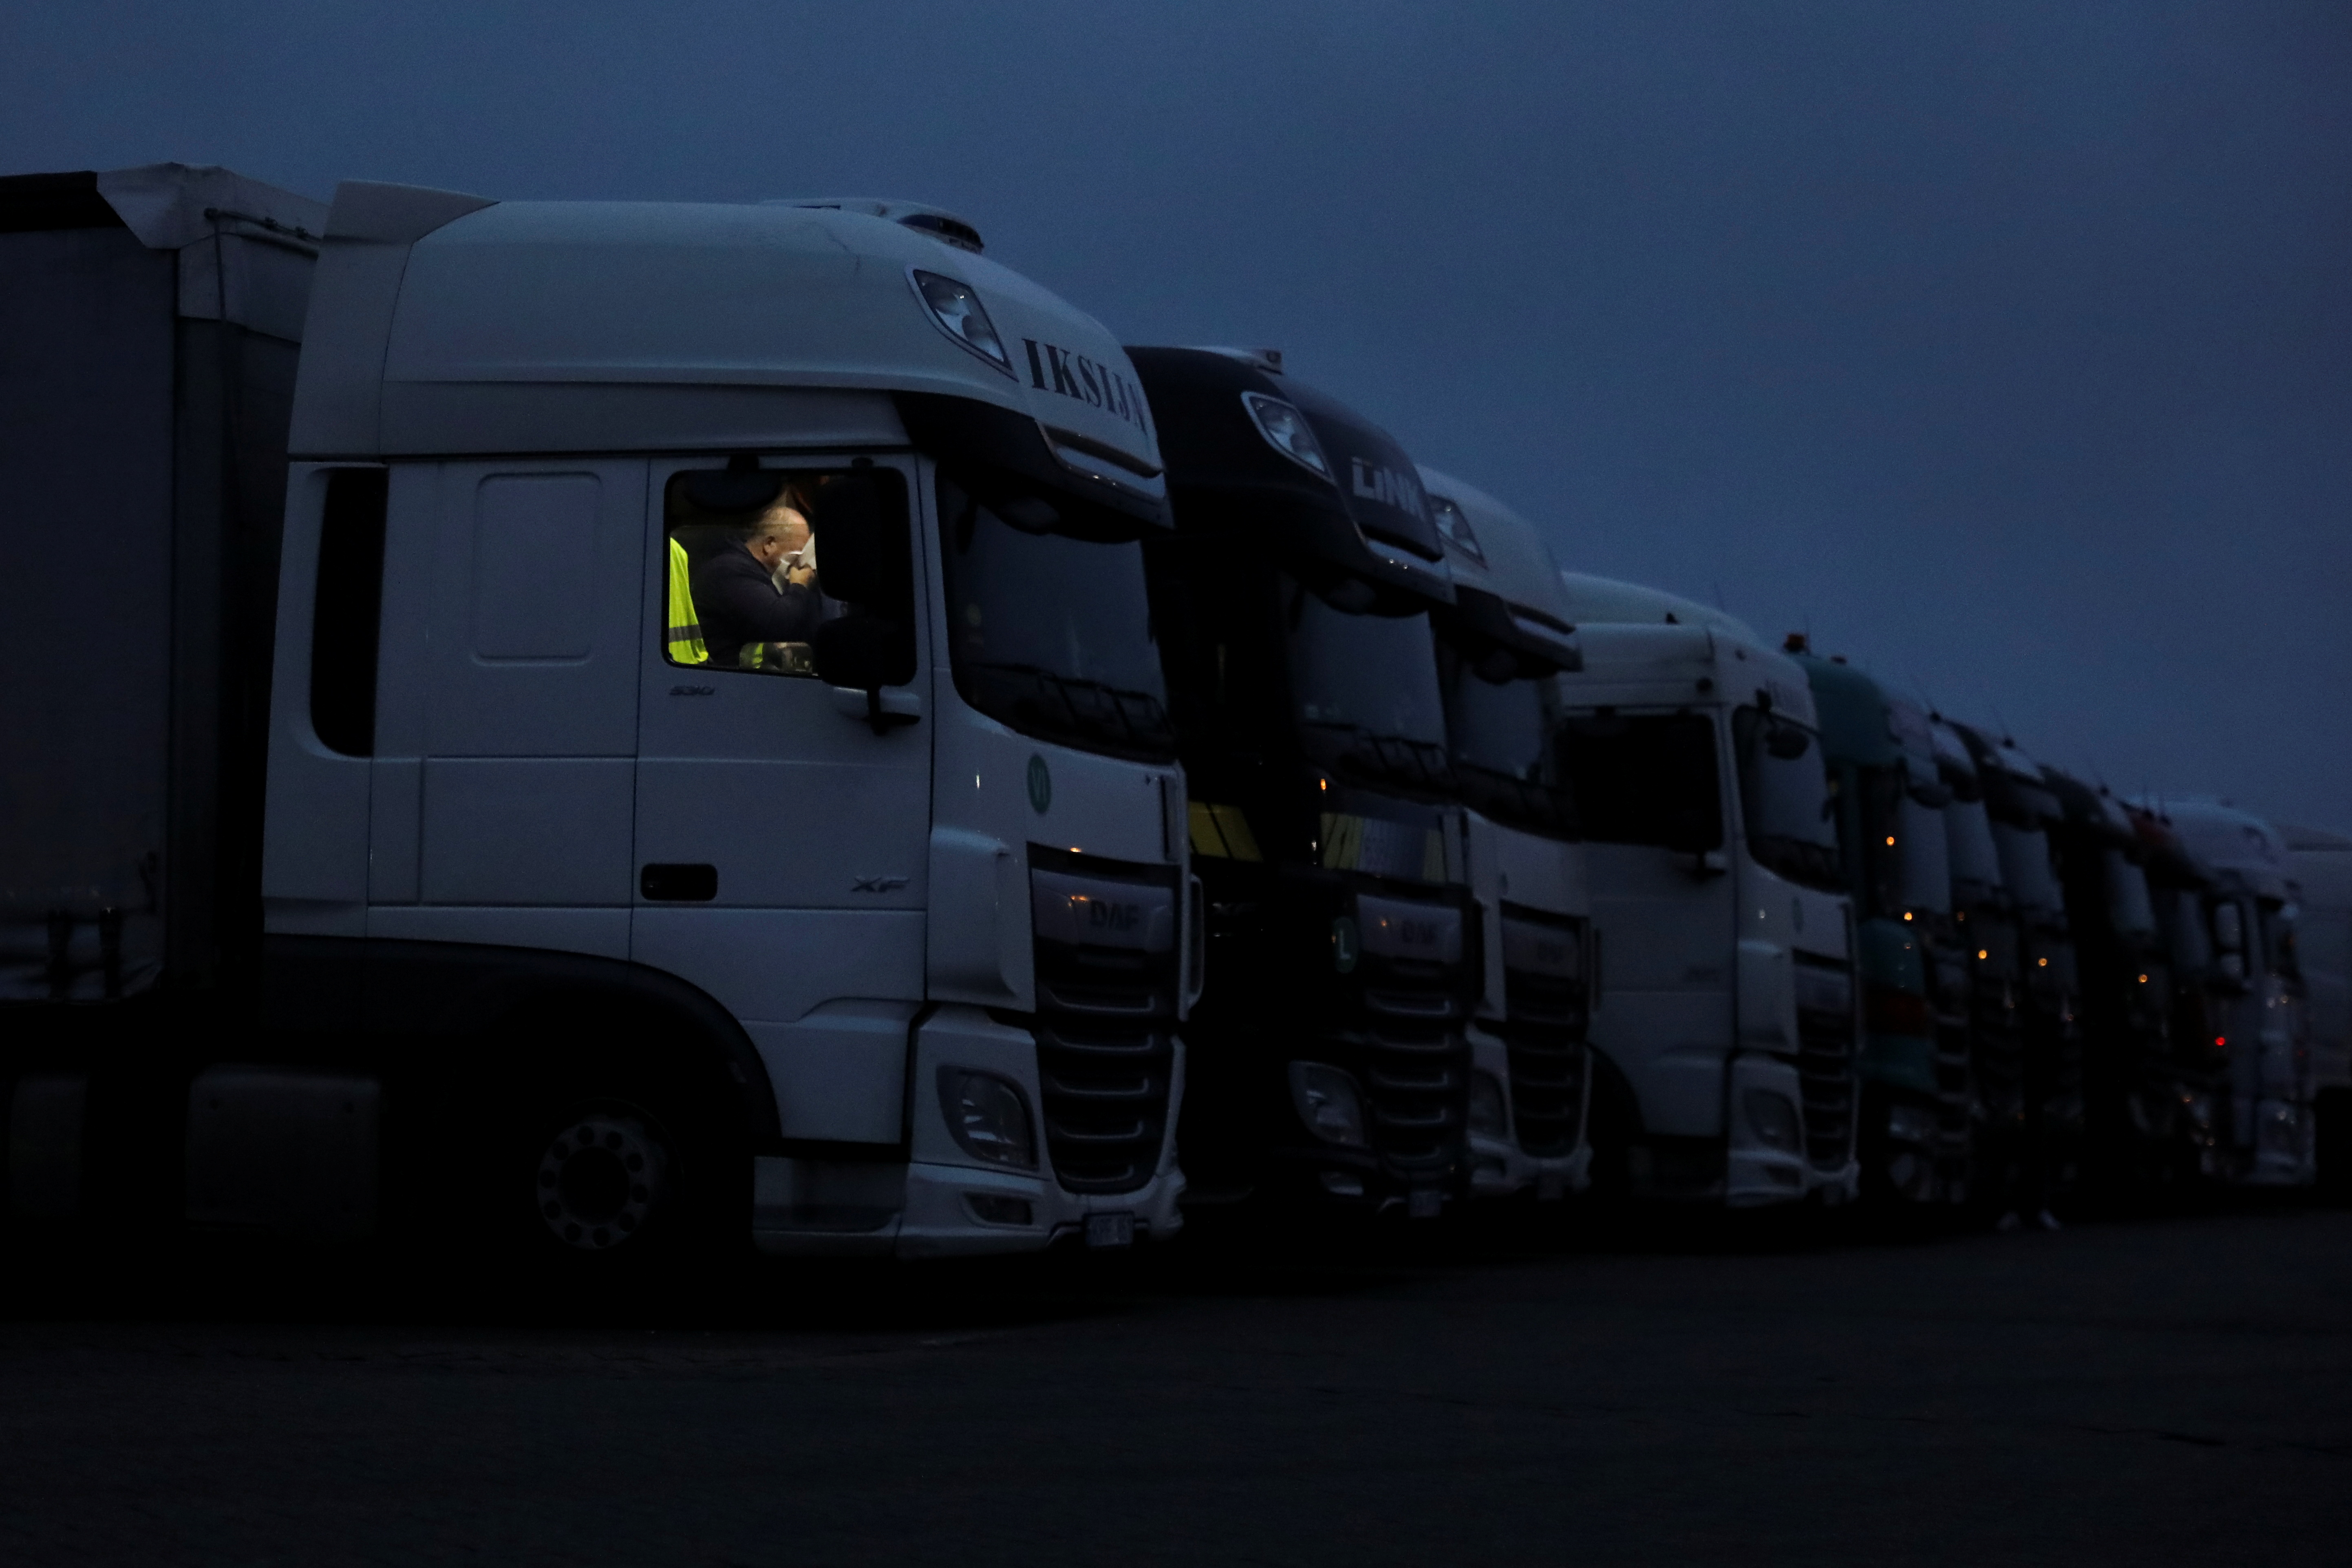 A driver rests inside his lorry at Ashford International Truck Stop, as EU countries impose a travel ban from the UK following the coronavirus disease (COVID-19) outbreak, in Ashford, Britain December 22, 2020. REUTERS/Simon Dawson